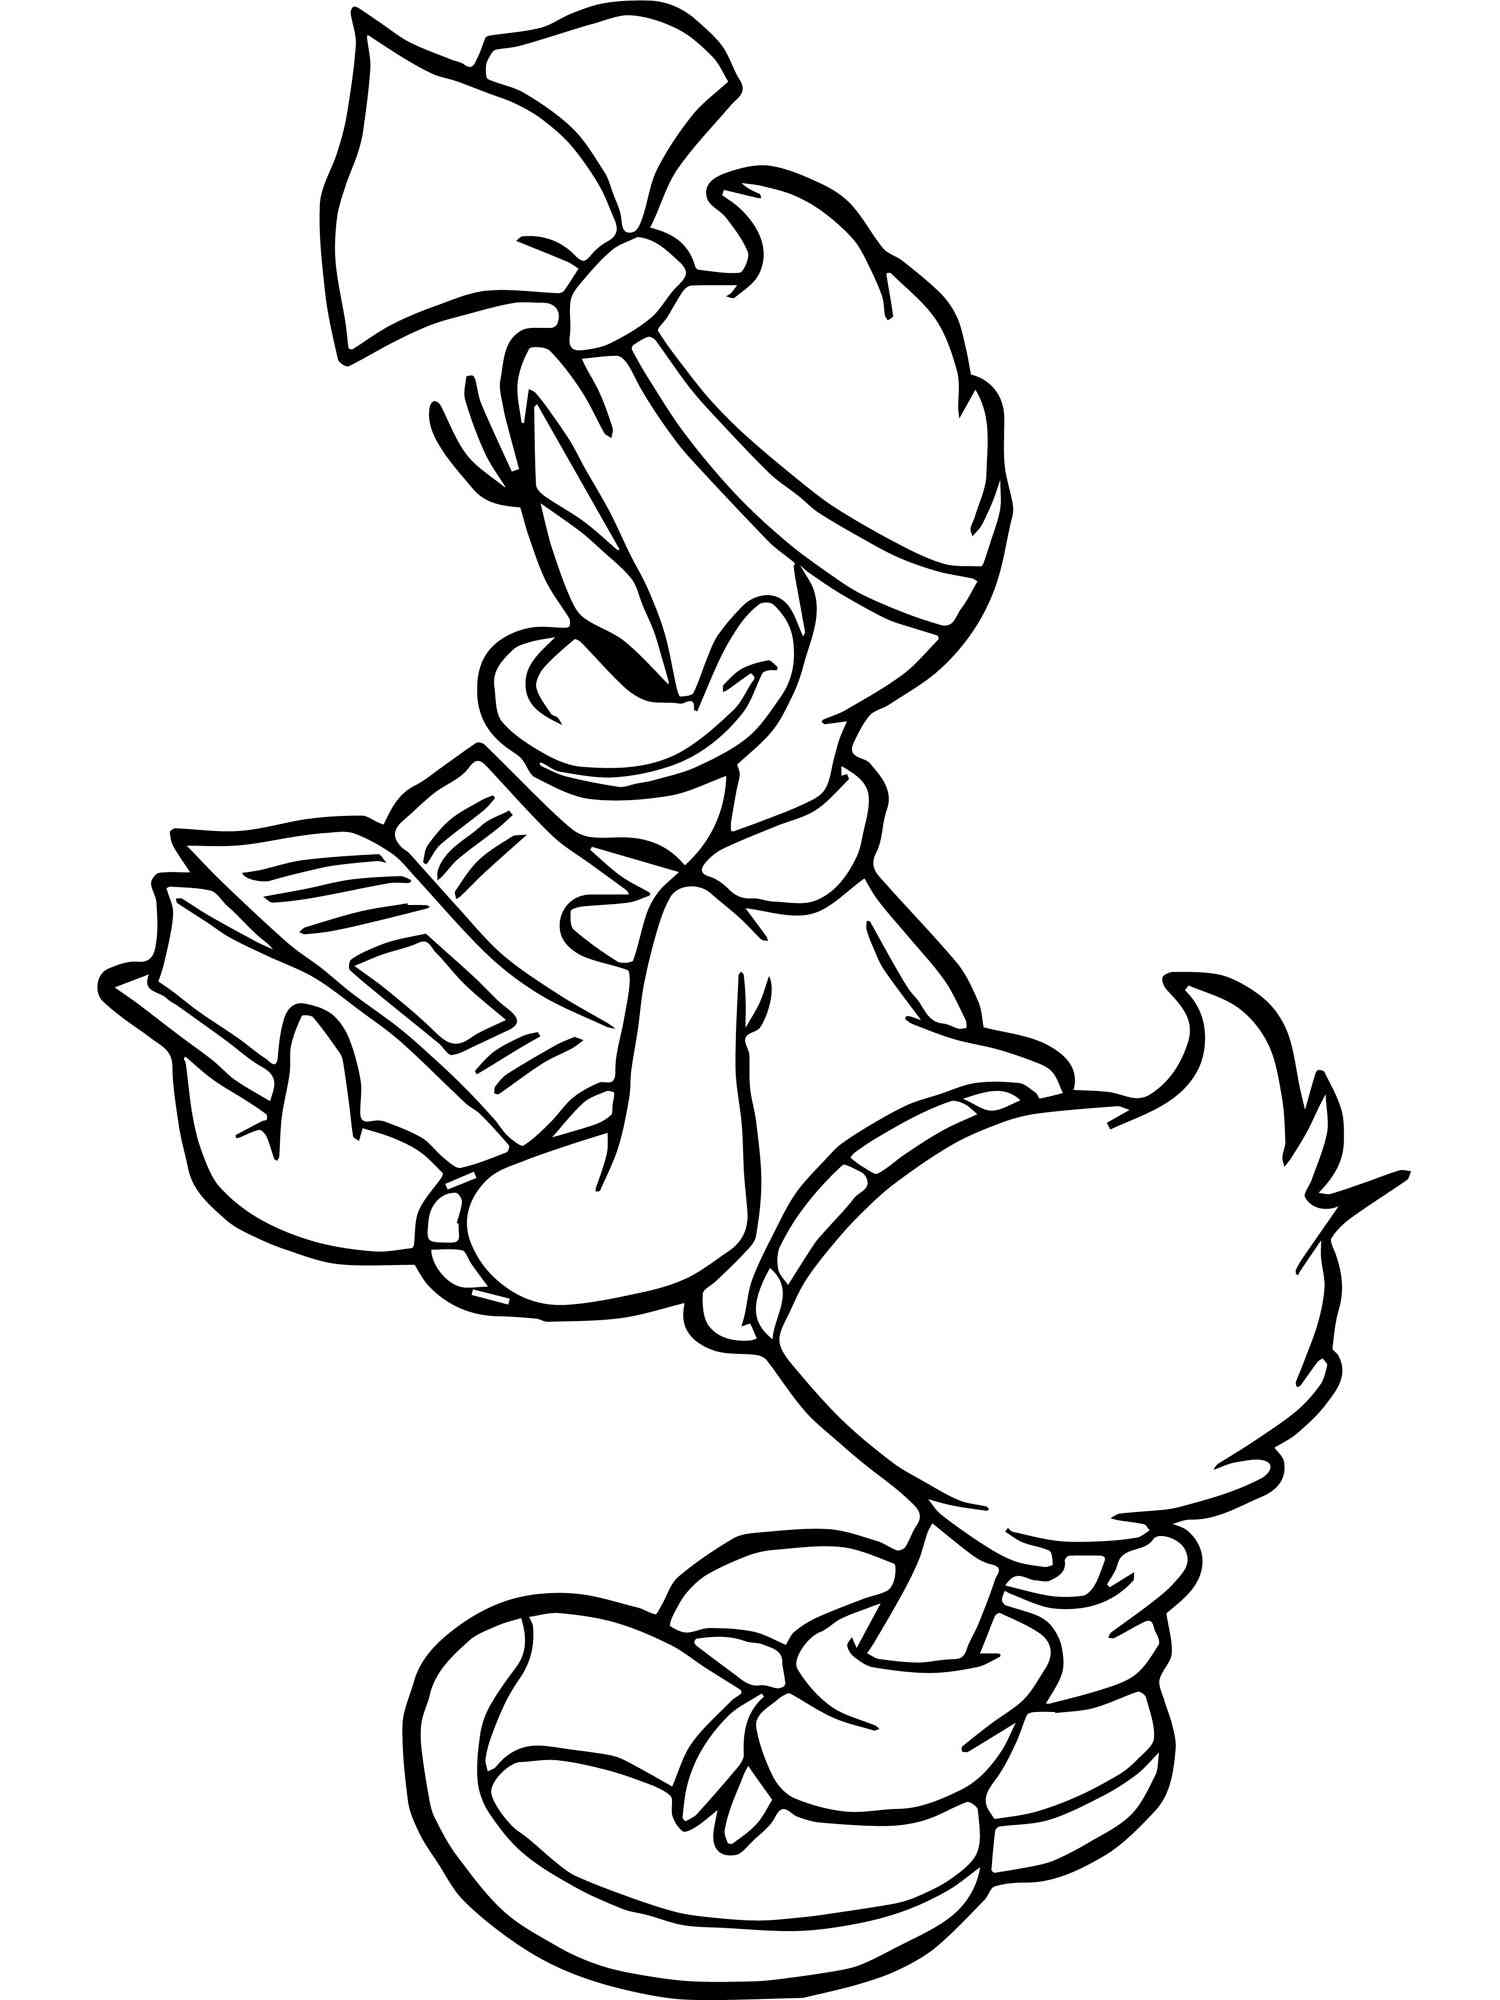 Daisy Duck 24 coloring page